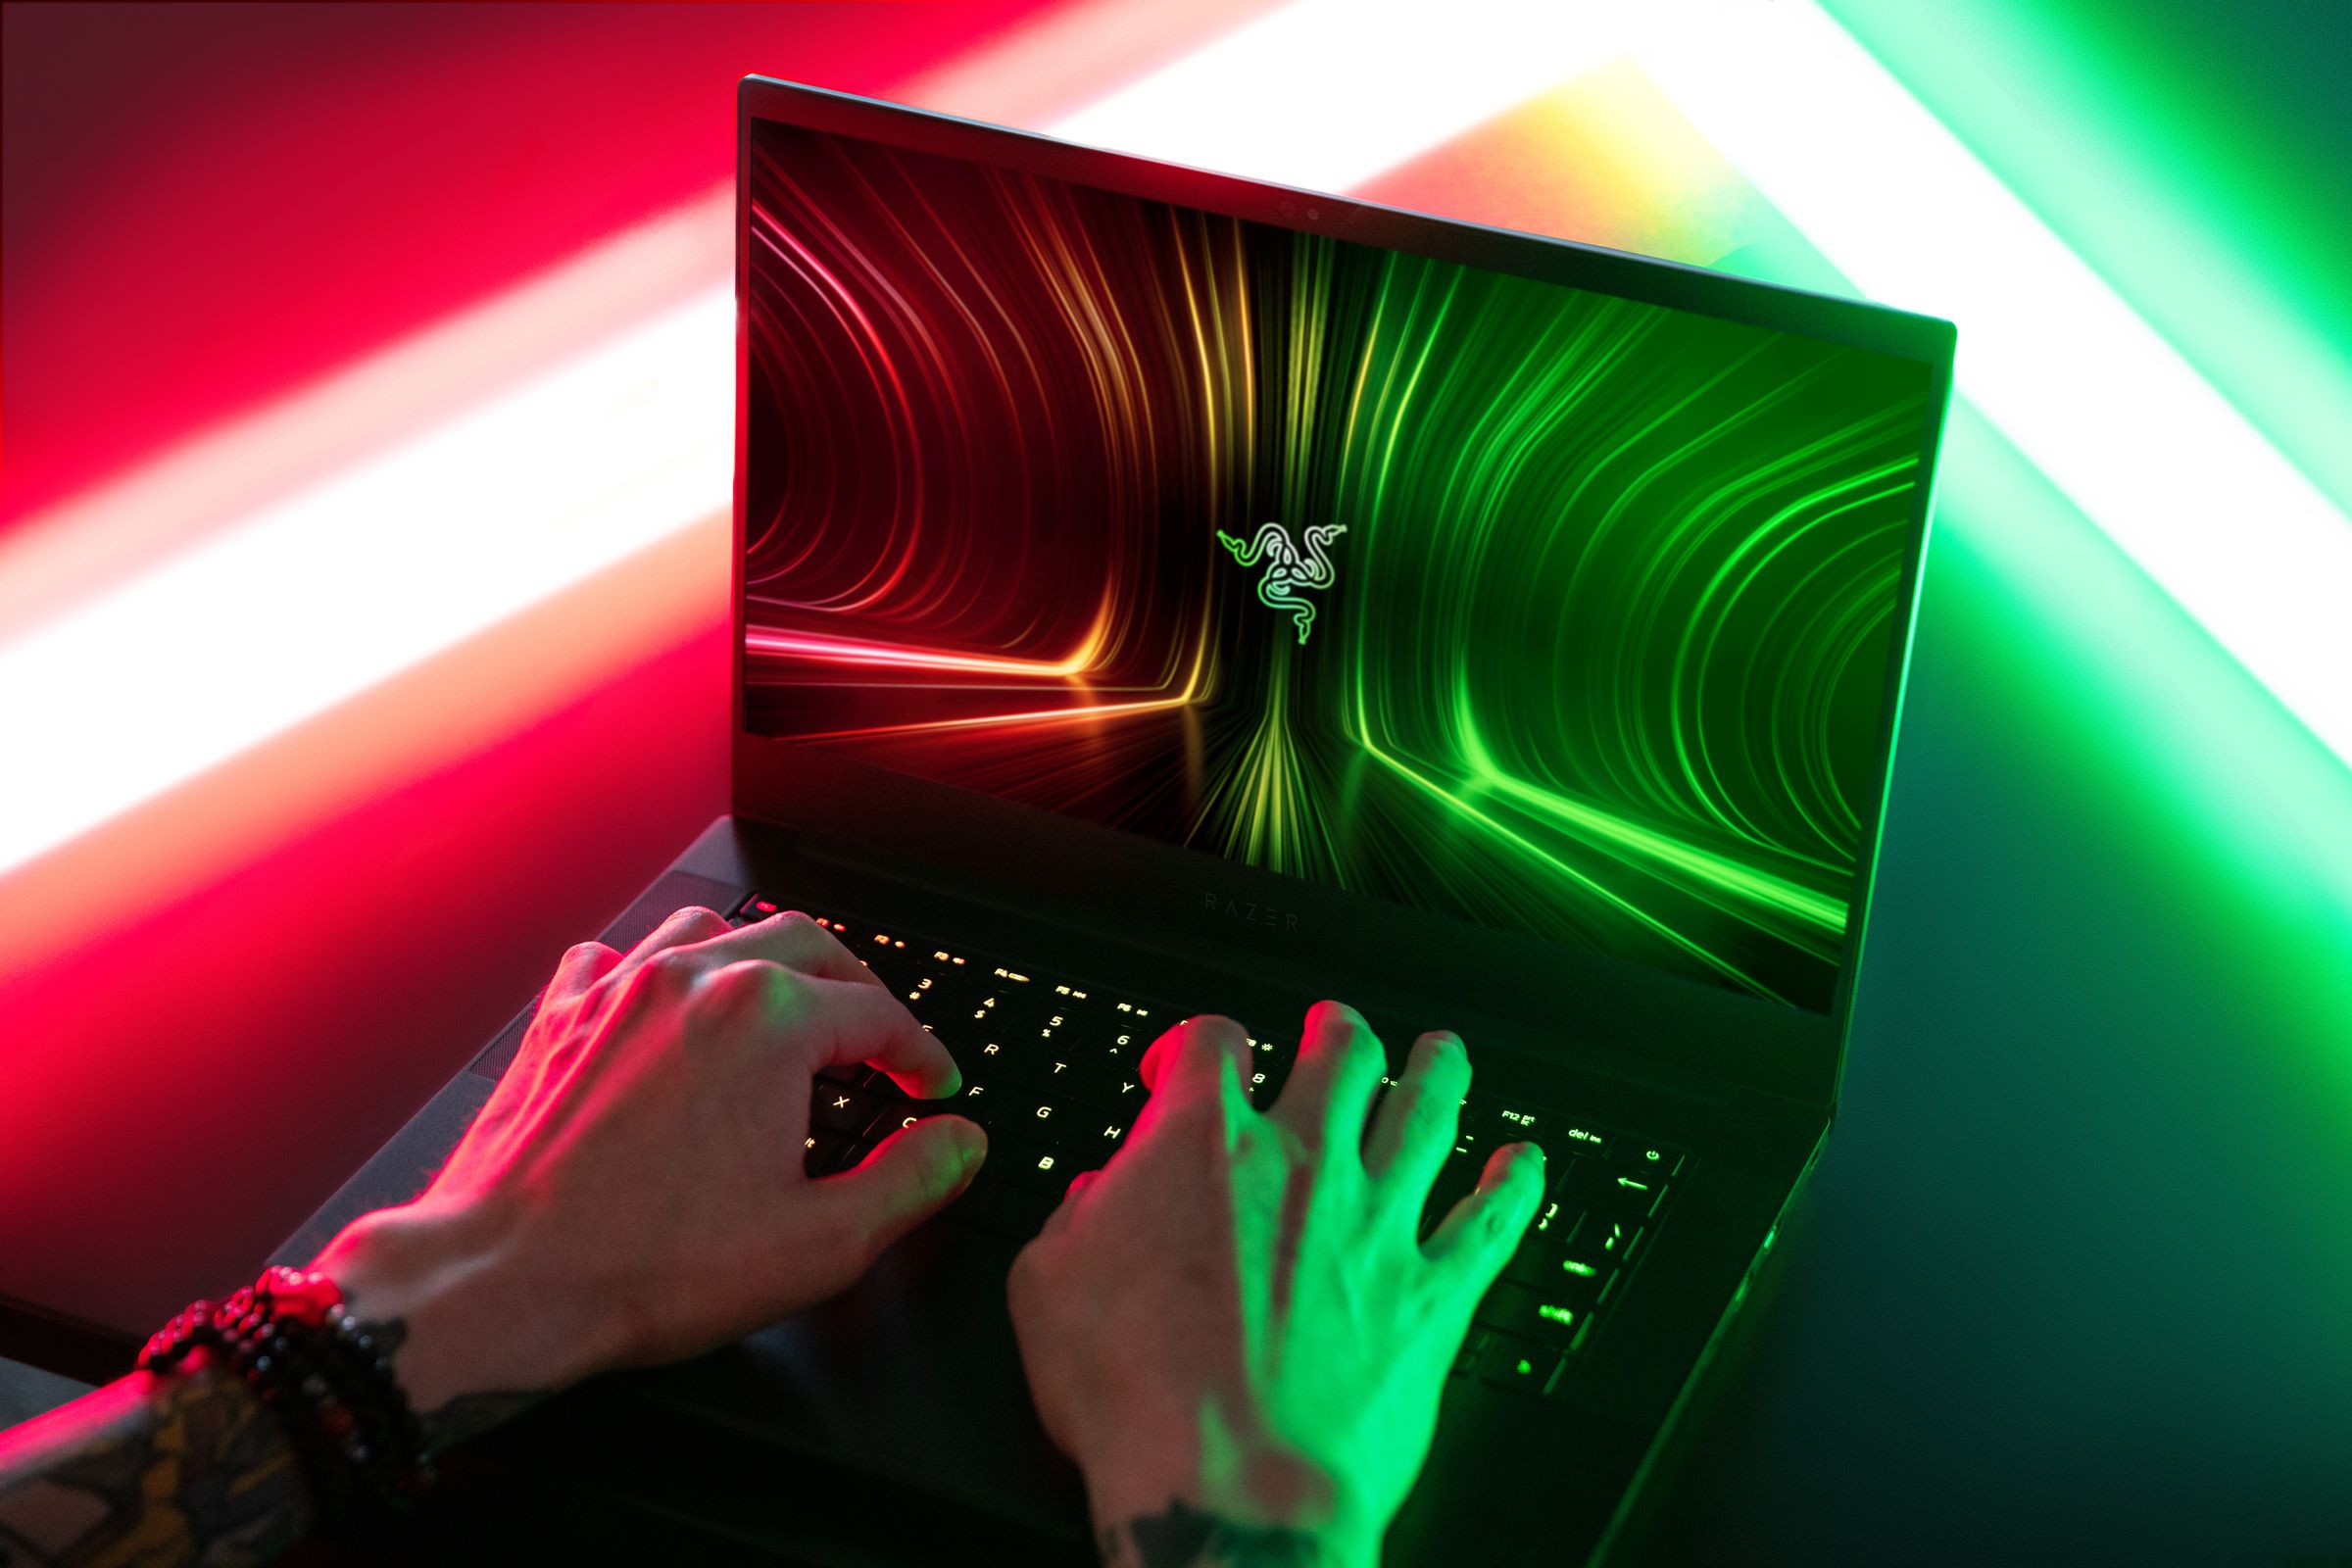 An over-the-shoulder shot of a user typing on the Razer Blade 14. The screen displays the Razer logo on a red, green, and black background.